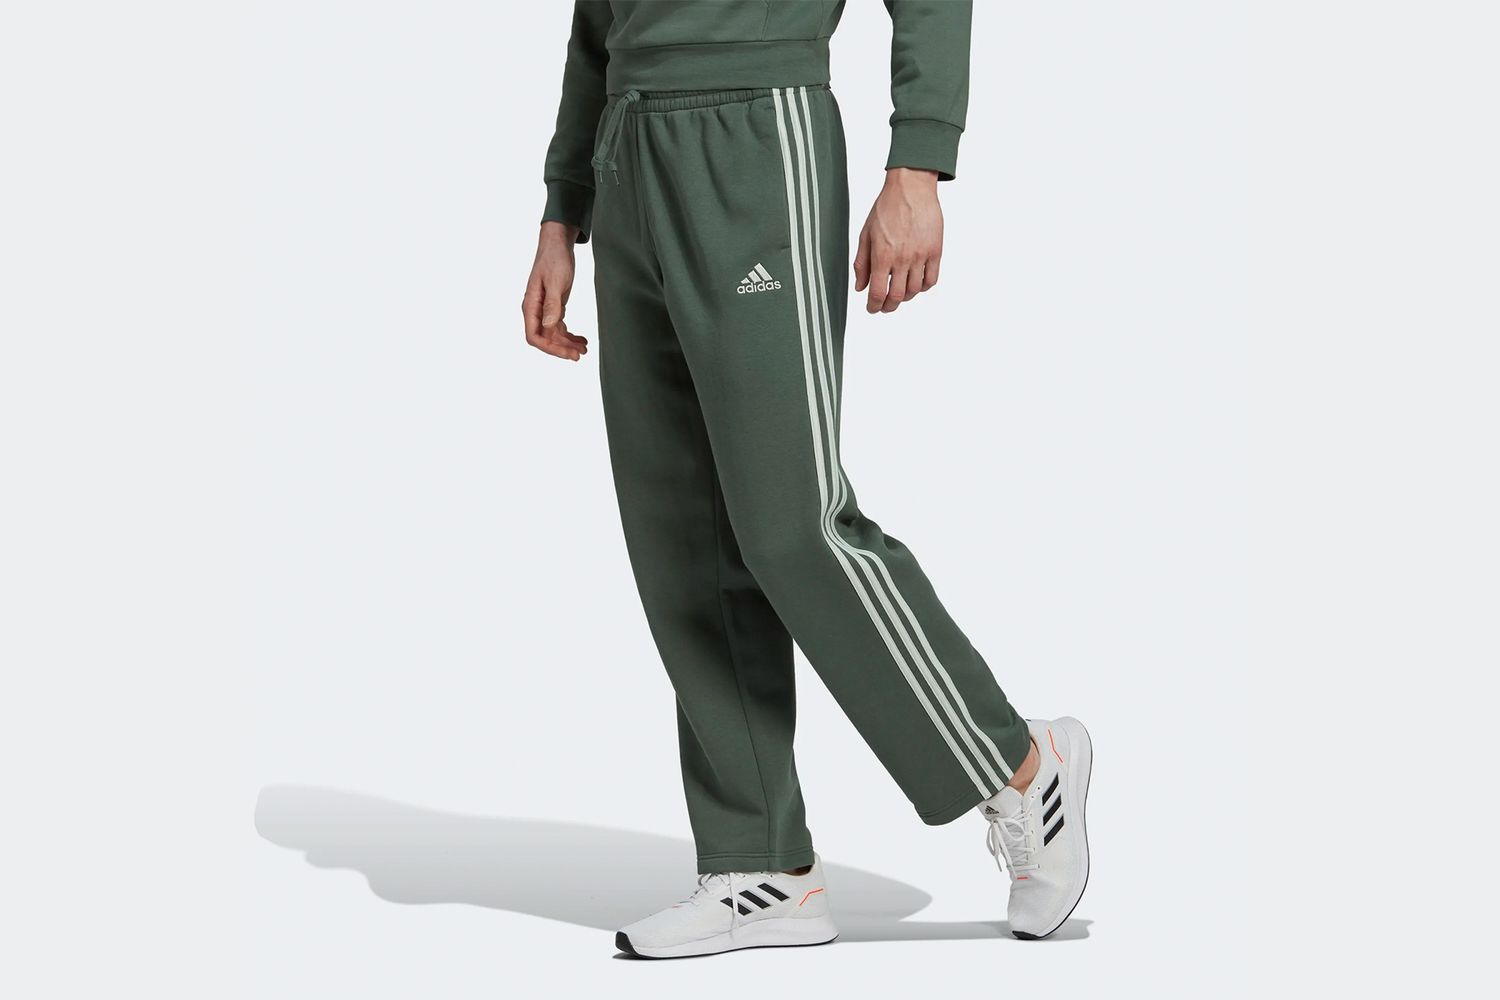 The 10 Best Affordable Sweatpants You Can Cop in 2022